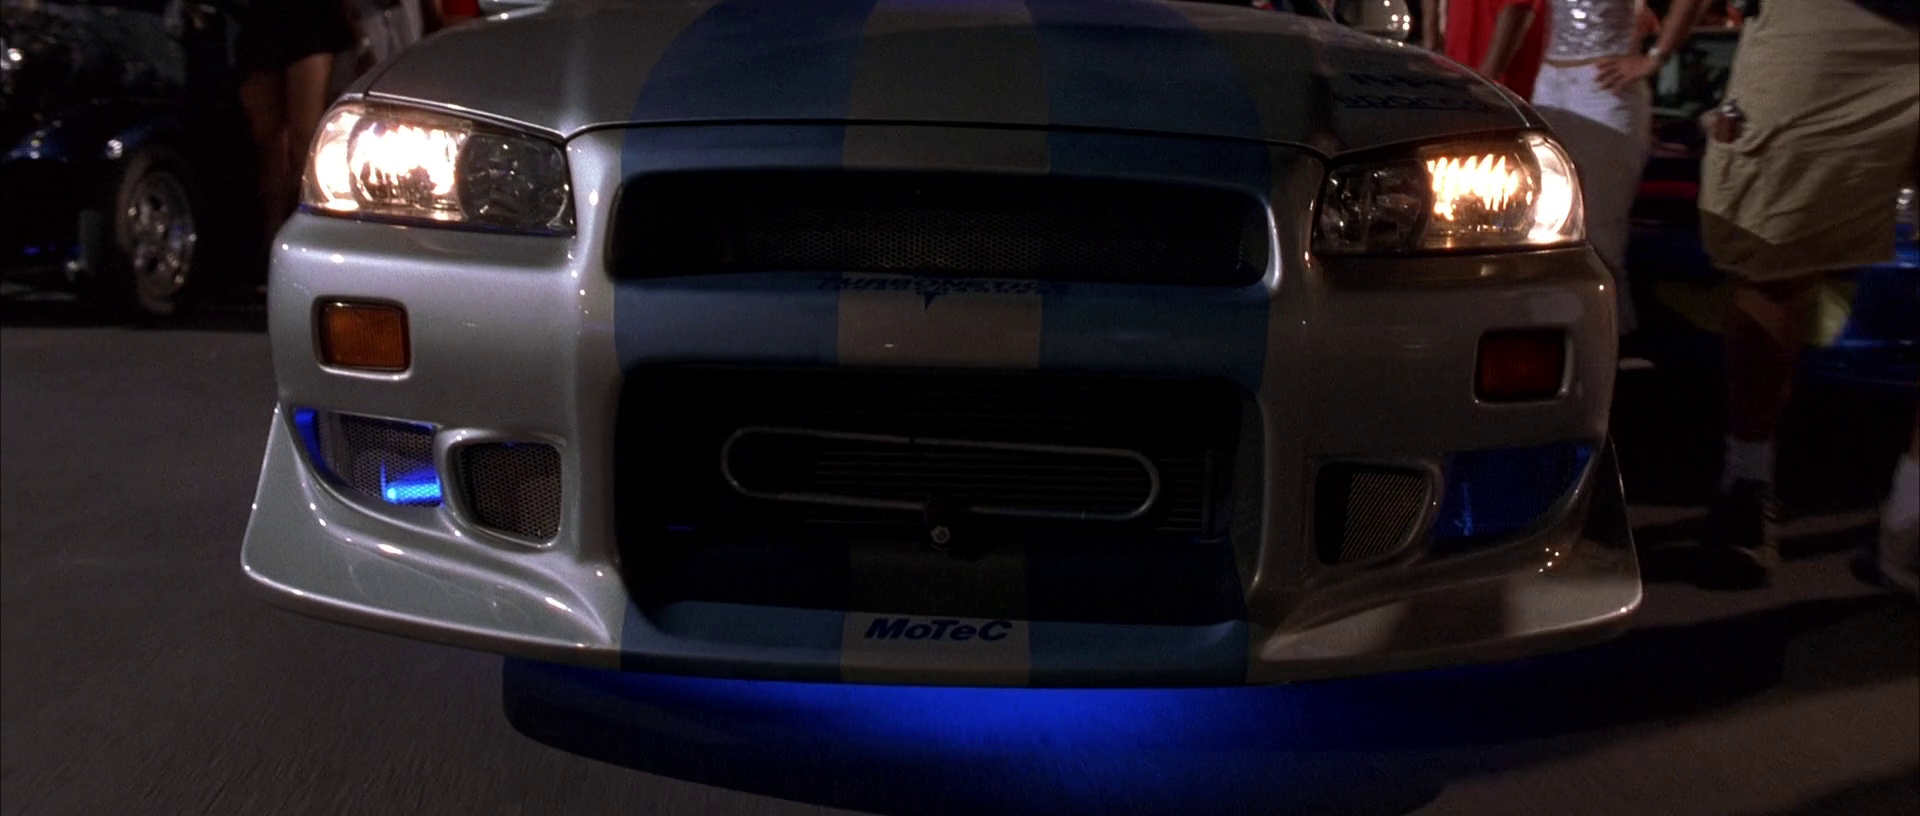 1999 Nissan Skyline Gt R R34 The Fast And The Furious Wiki